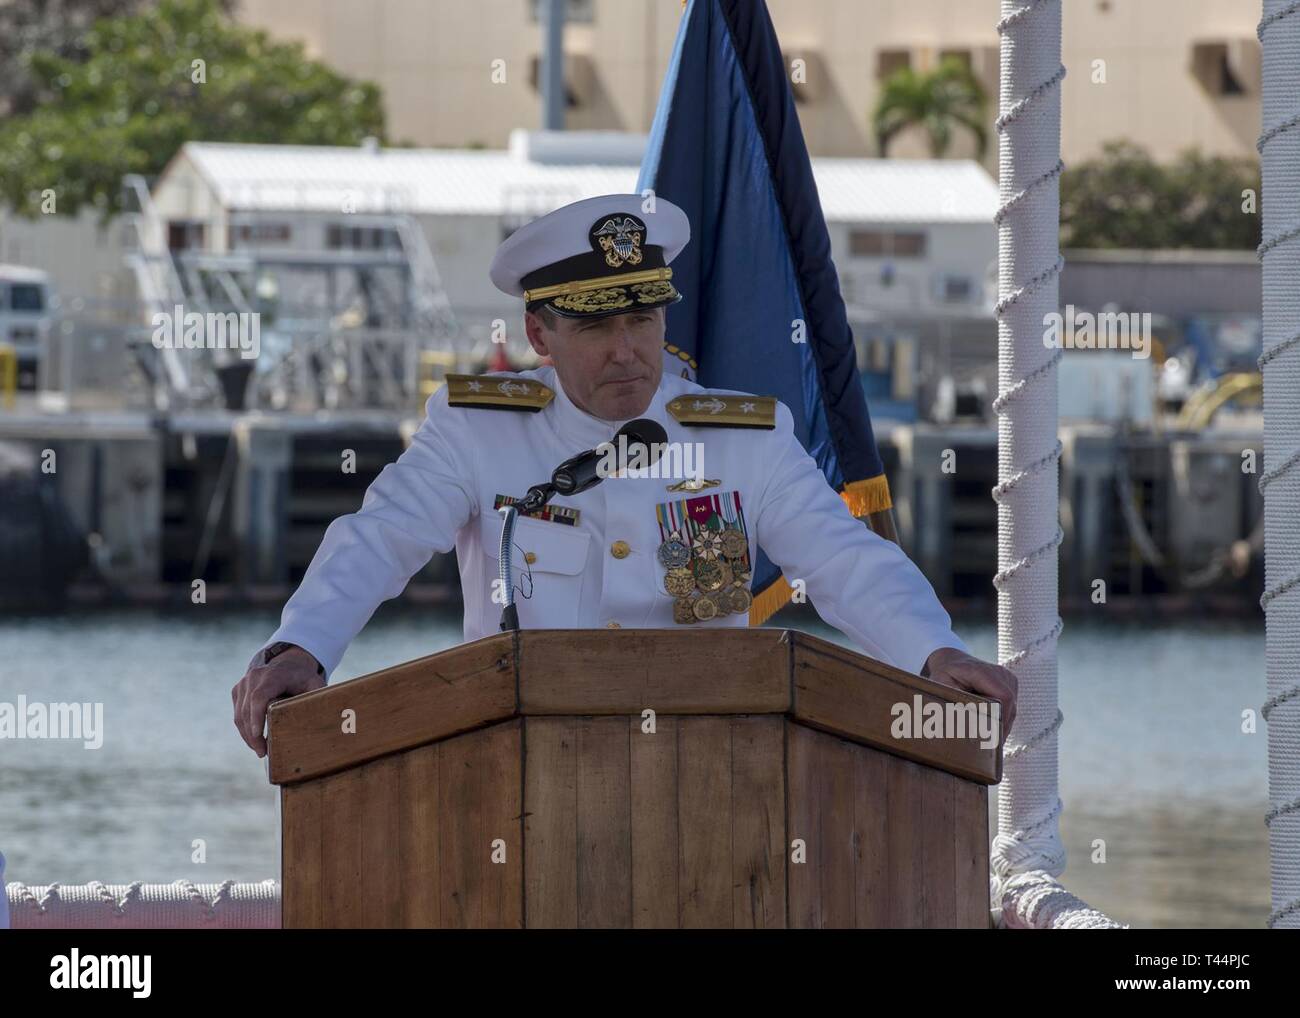 PEARL HARBOR (Feb. 21, 2019) - Rear Adm. Blake Converse, commander,  Submarine Force, U.S. Pacific Fleet (COMSUBPAC) delivers remarks during the  COMSUBPAC change of command ceremony aboard the Virginia-class fast attack  submarine